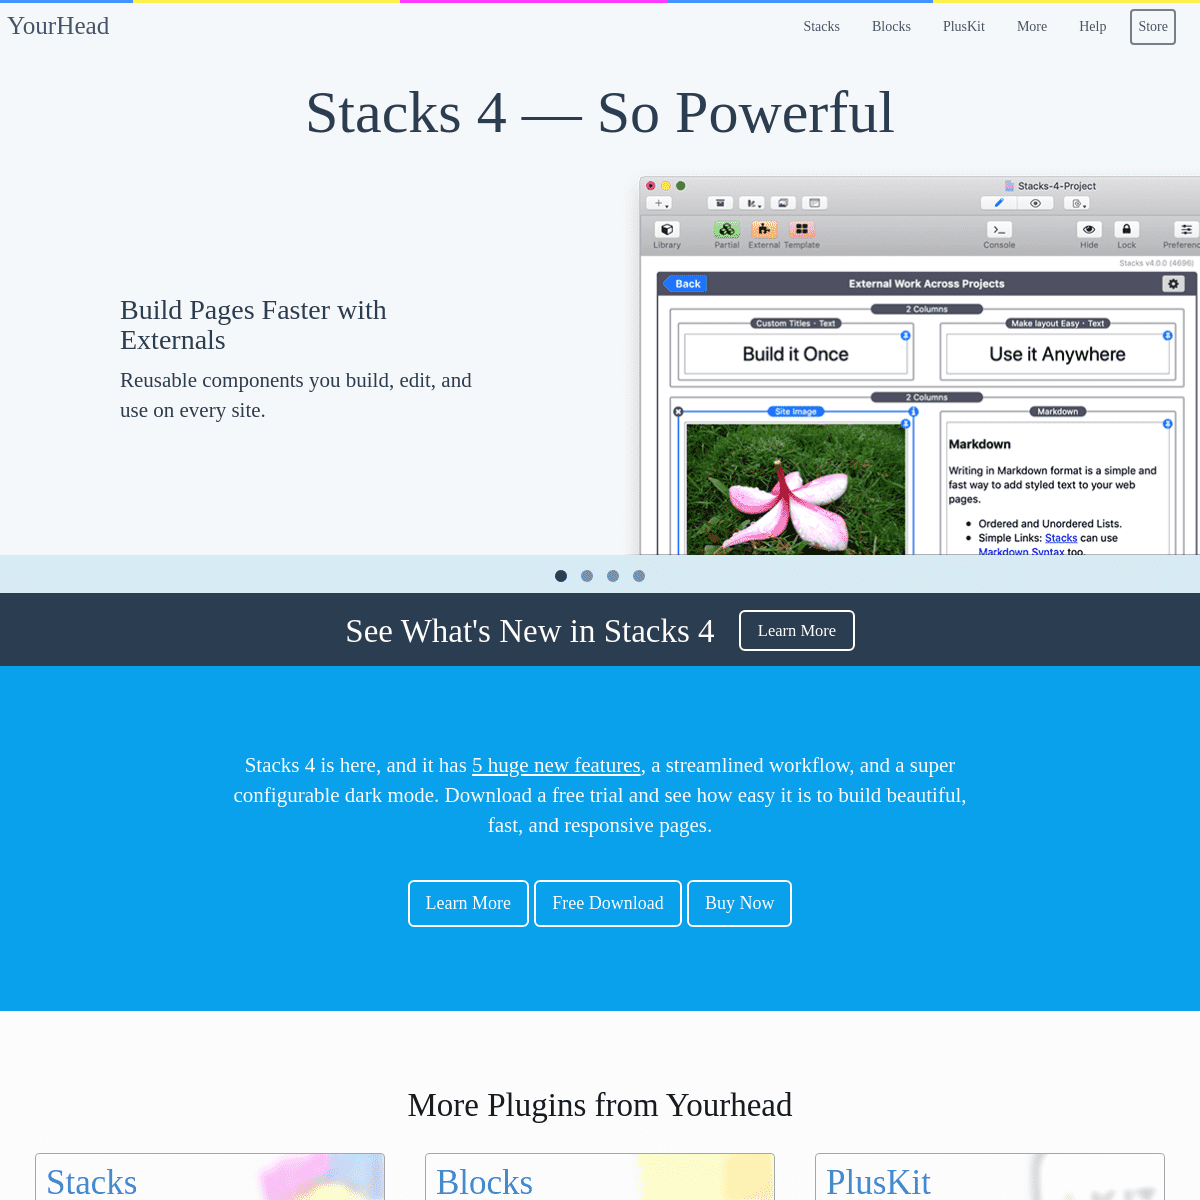 A complete backup of https://yourhead.com